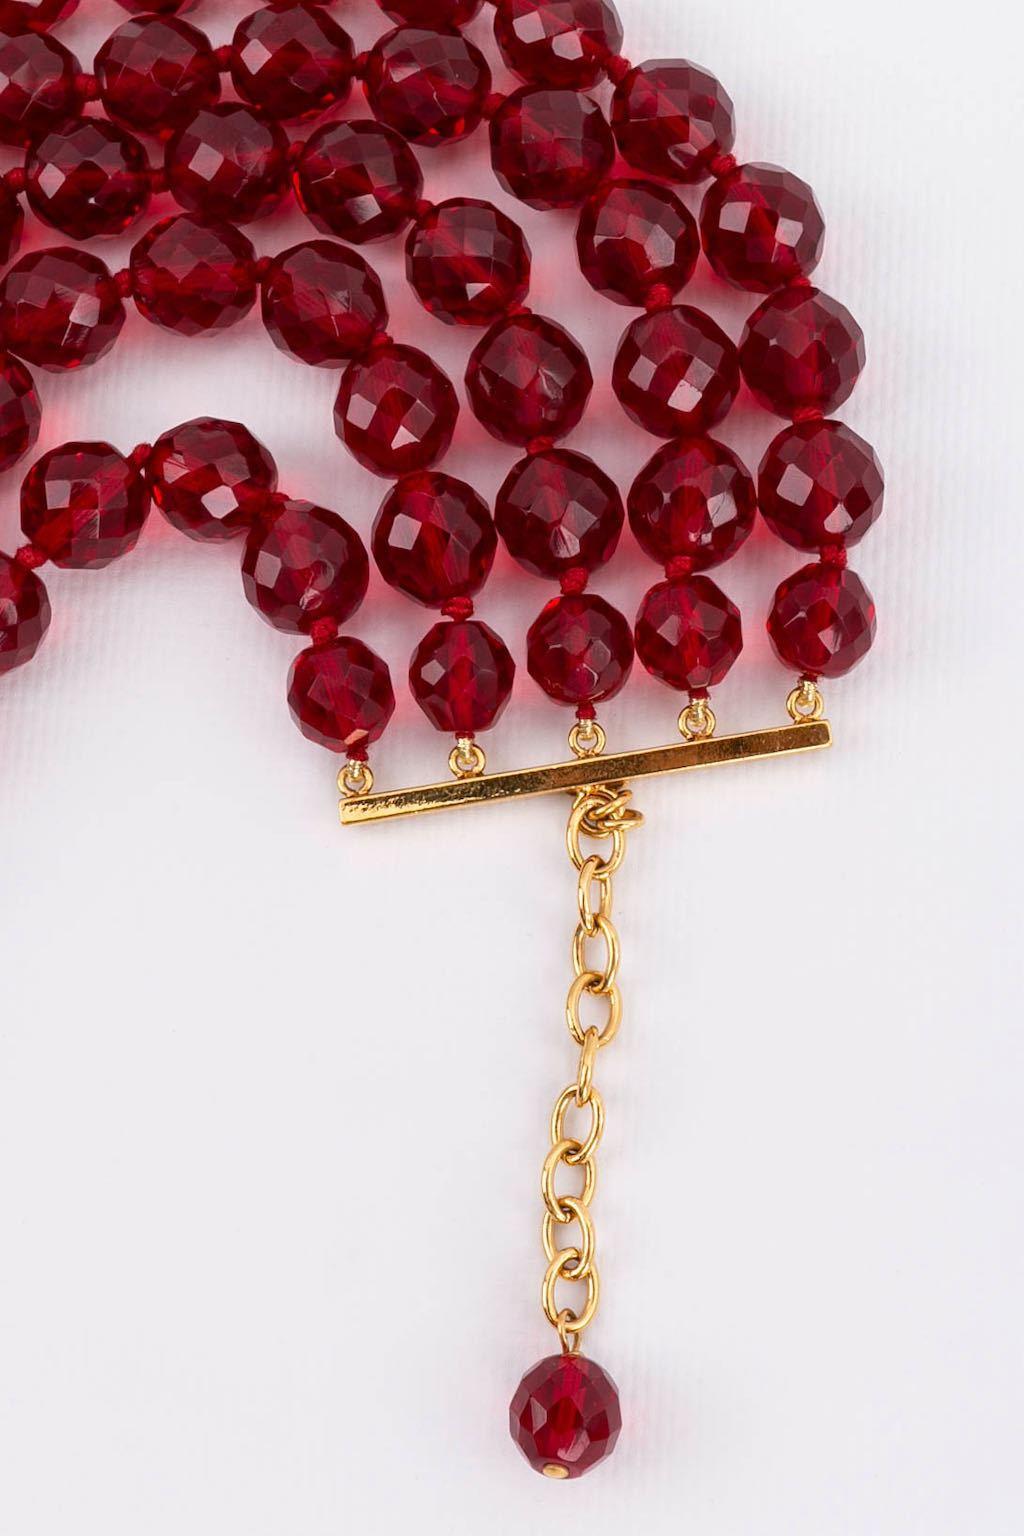 Women's Chanel Red Beads Necklace in Gilded Metal For Sale